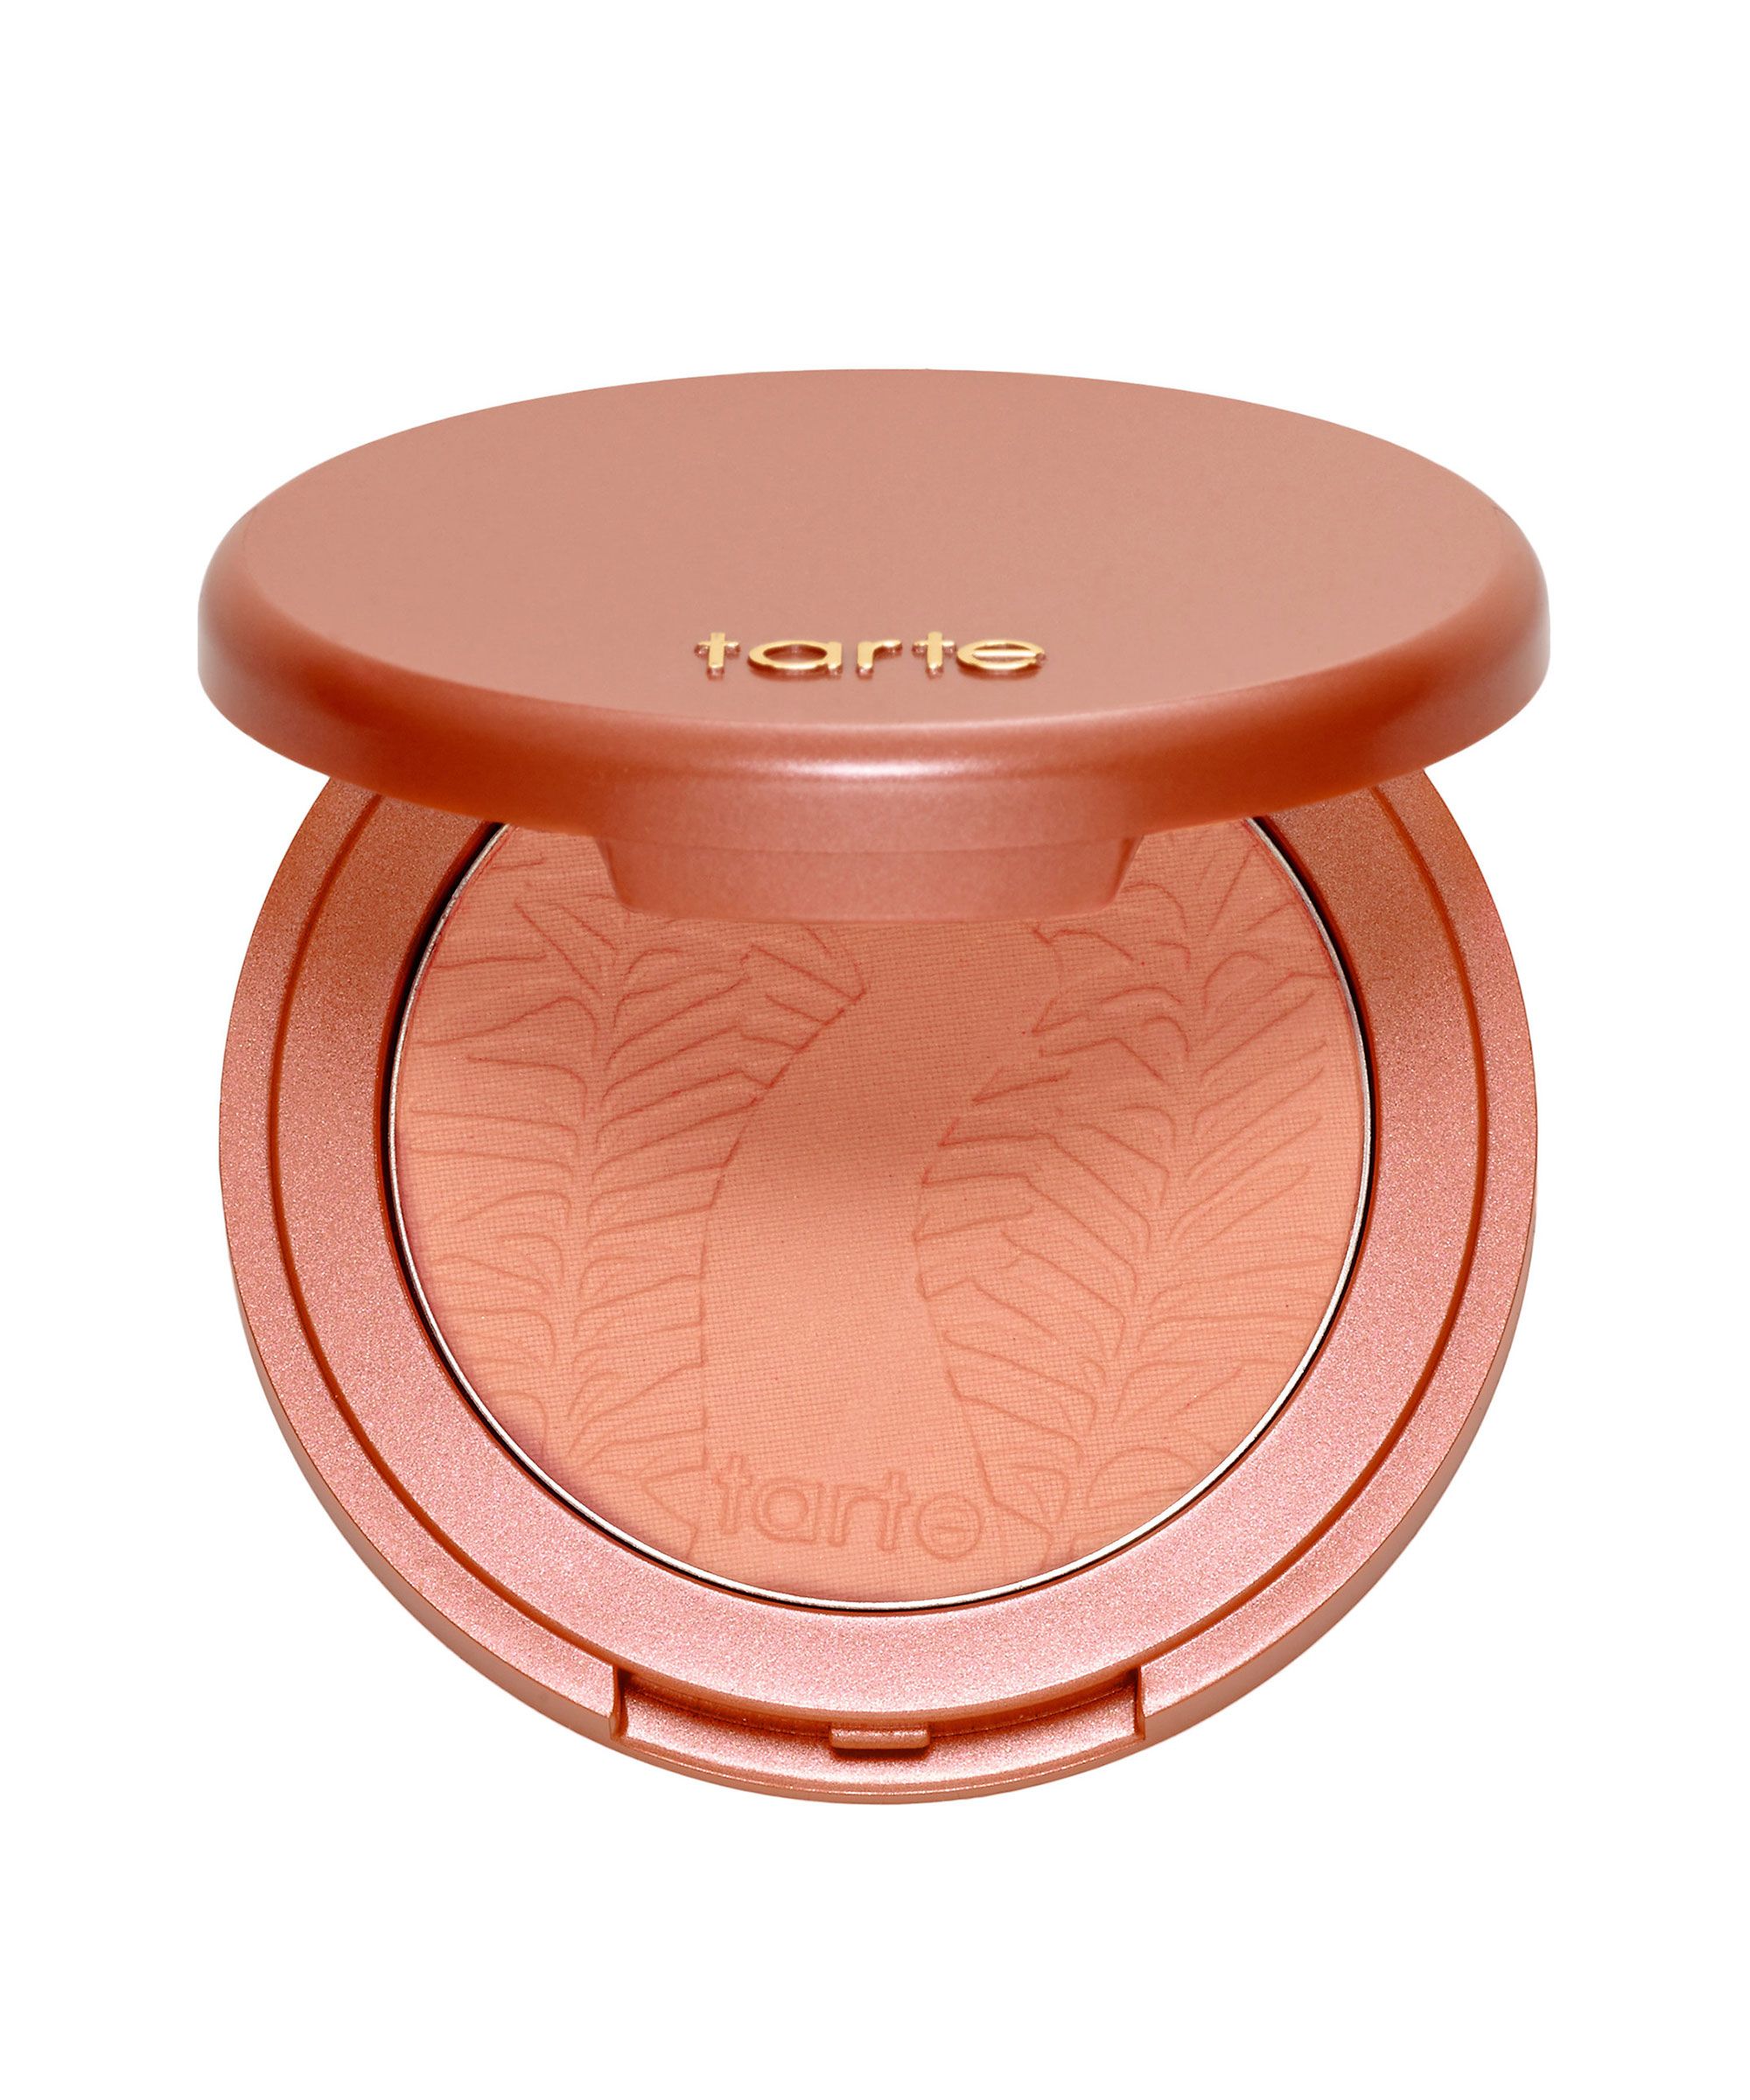 5 alternatives to this sold-out drugstore blush